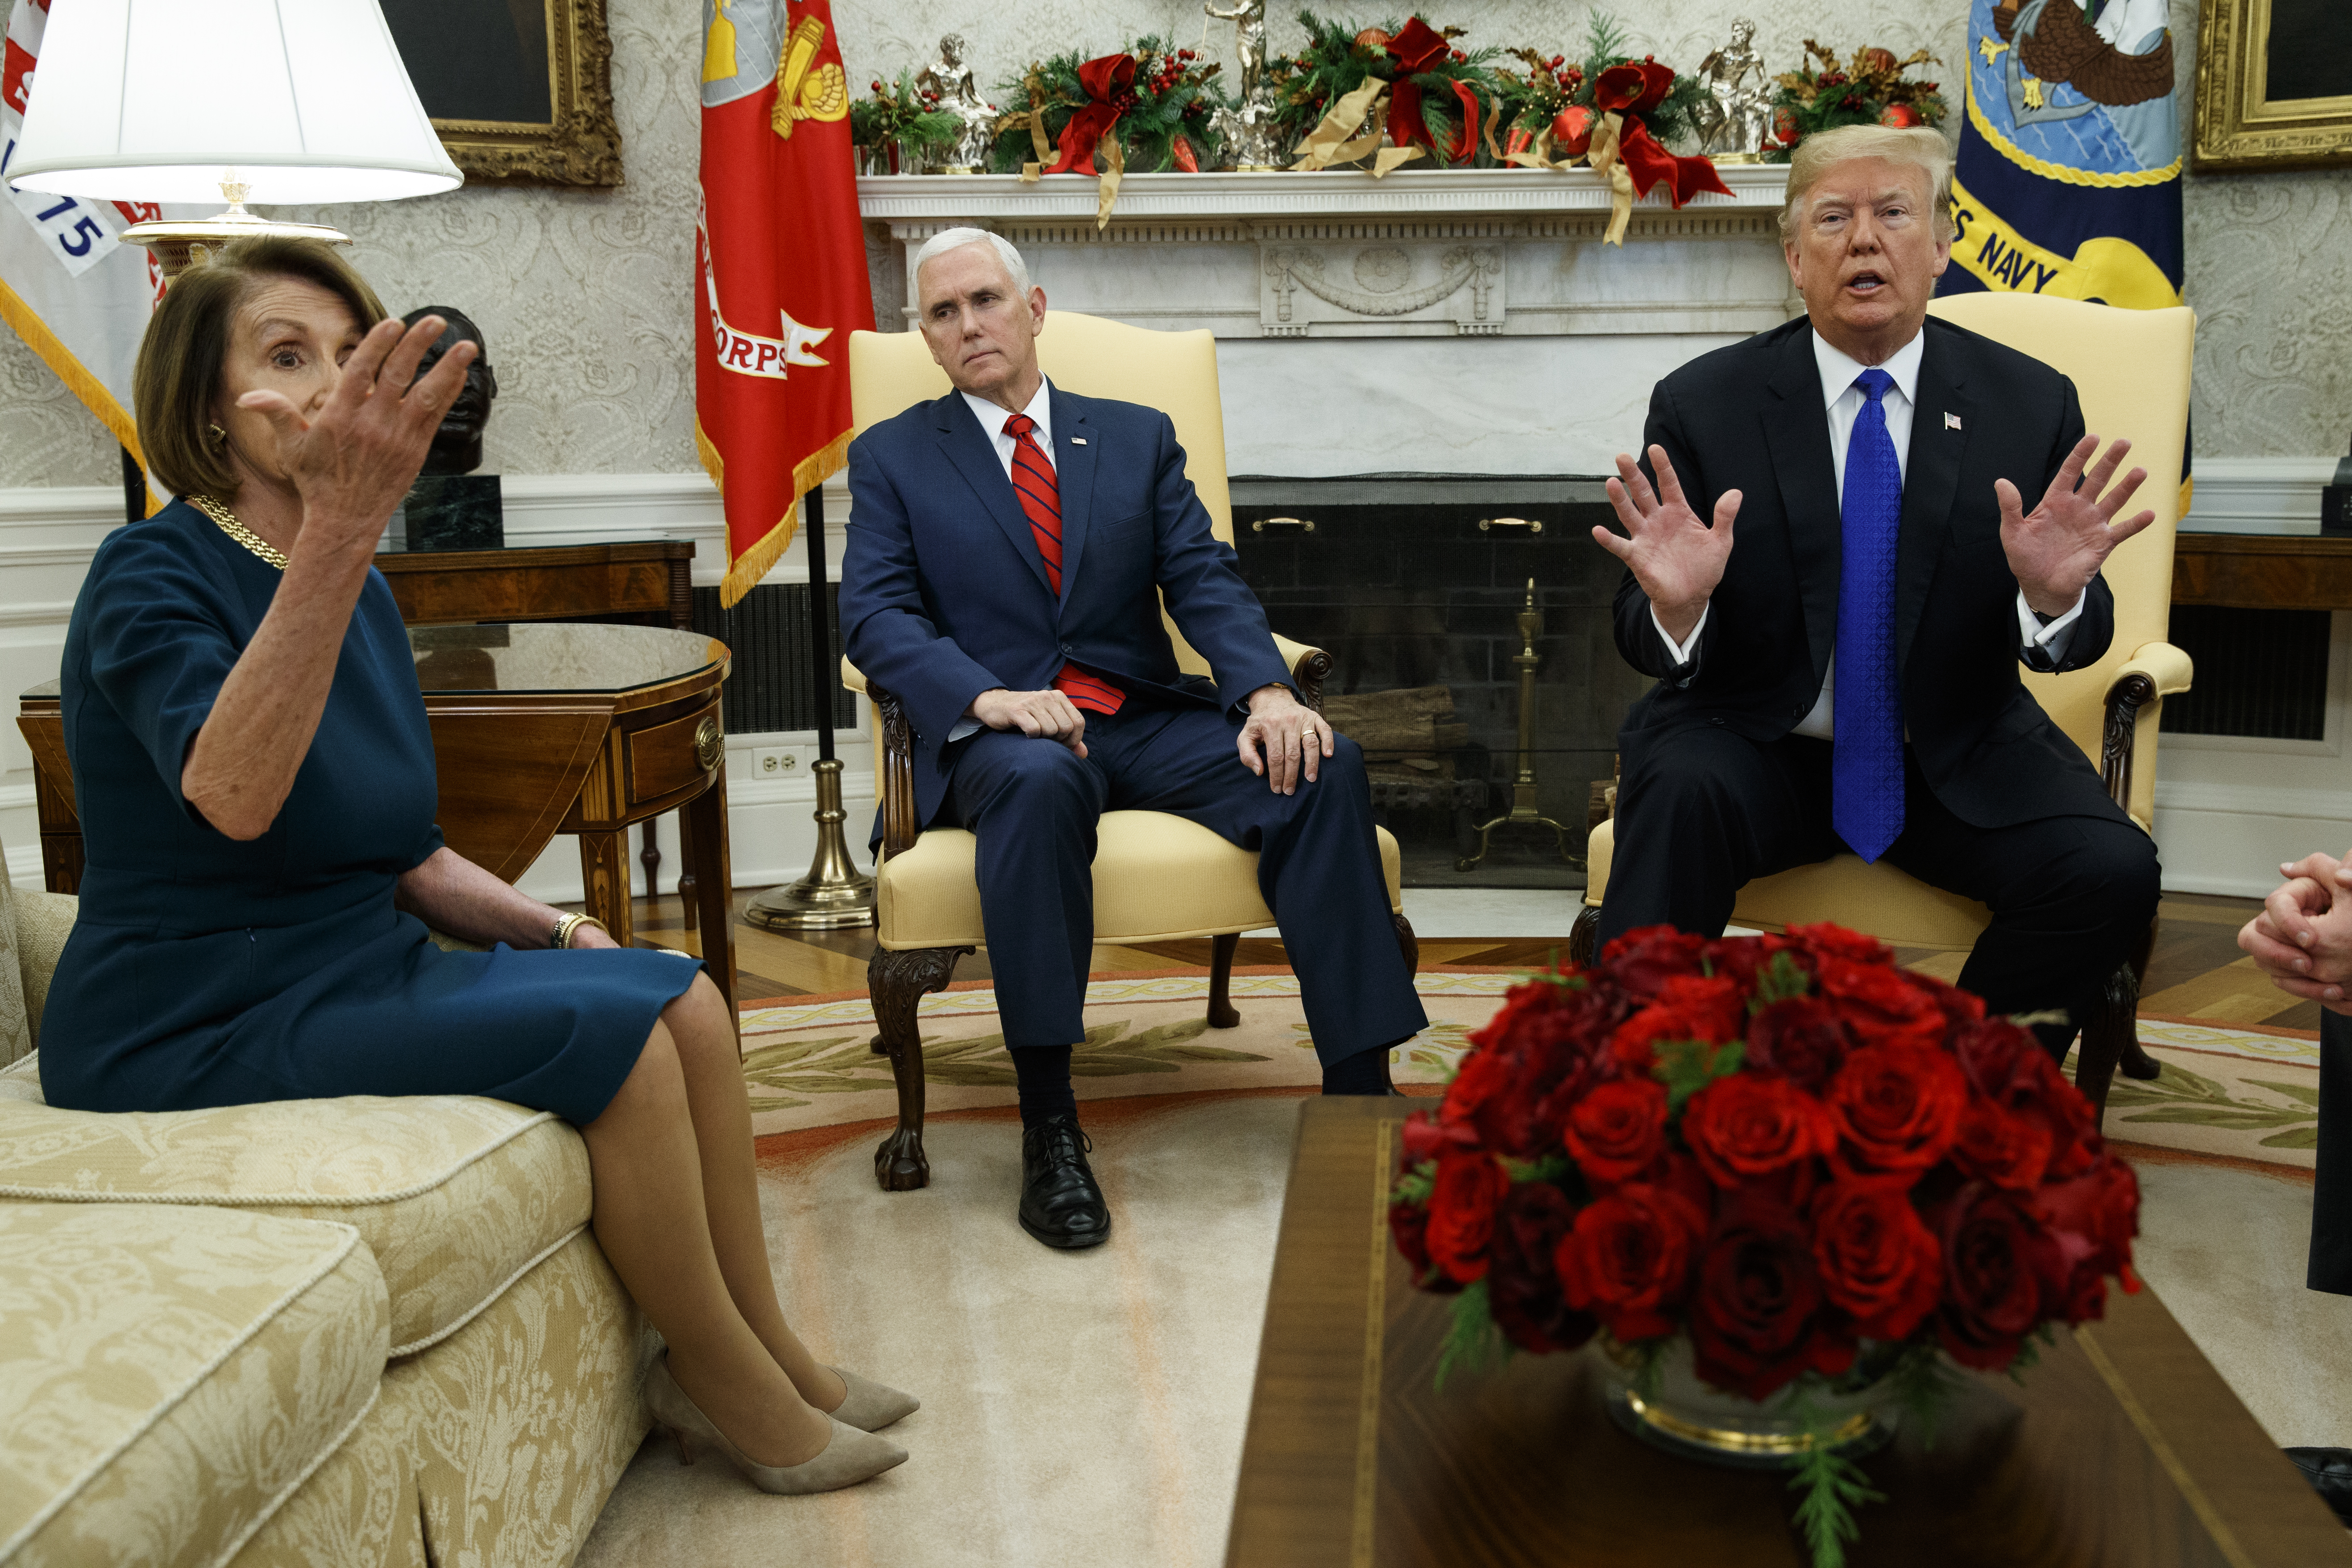 Vice President Mike Pence, center, listens as President Donald Trump argues with House Minority Leader Rep. Nancy Pelosi, D-Calif., during a meeting in the Oval Office of the White House